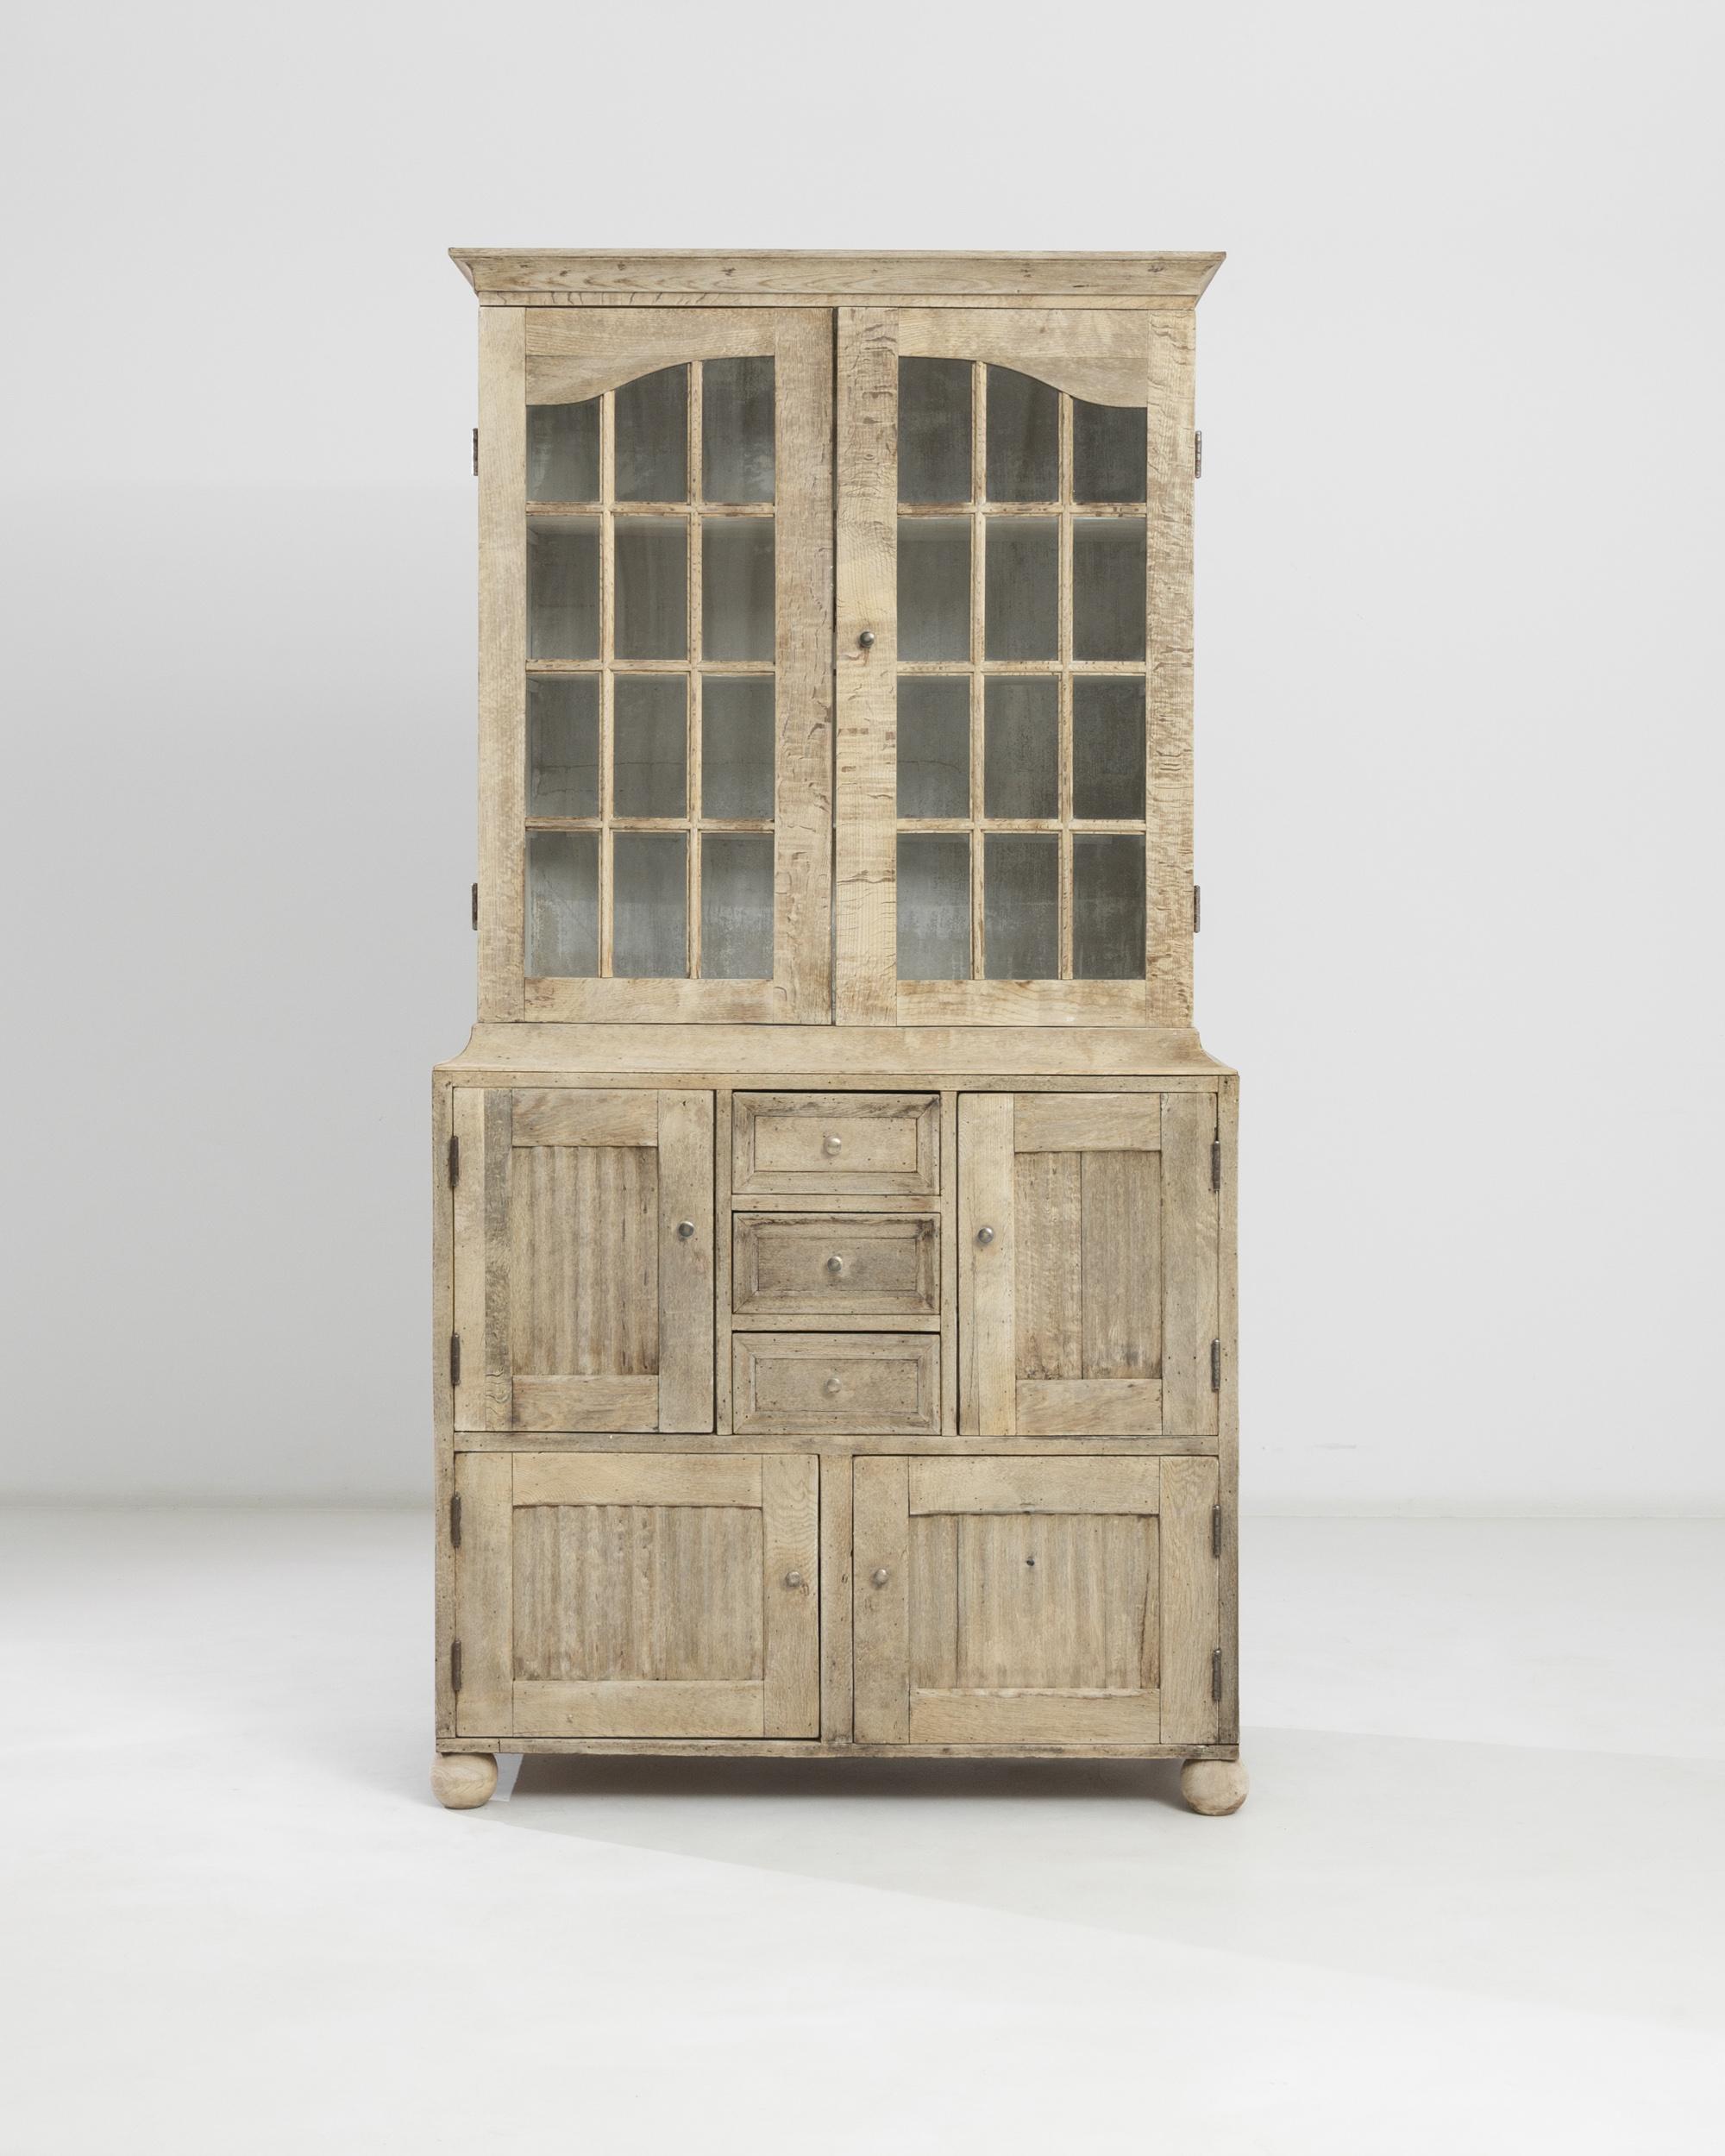 This vintage oak vitrine makes a charming country accent. Built in Great Britain in the 19th century, the ridges of the paneling evokes the bygone flurry of washboards on laundry day. Mullioned windows offer a view onto a trio of interior shelves,